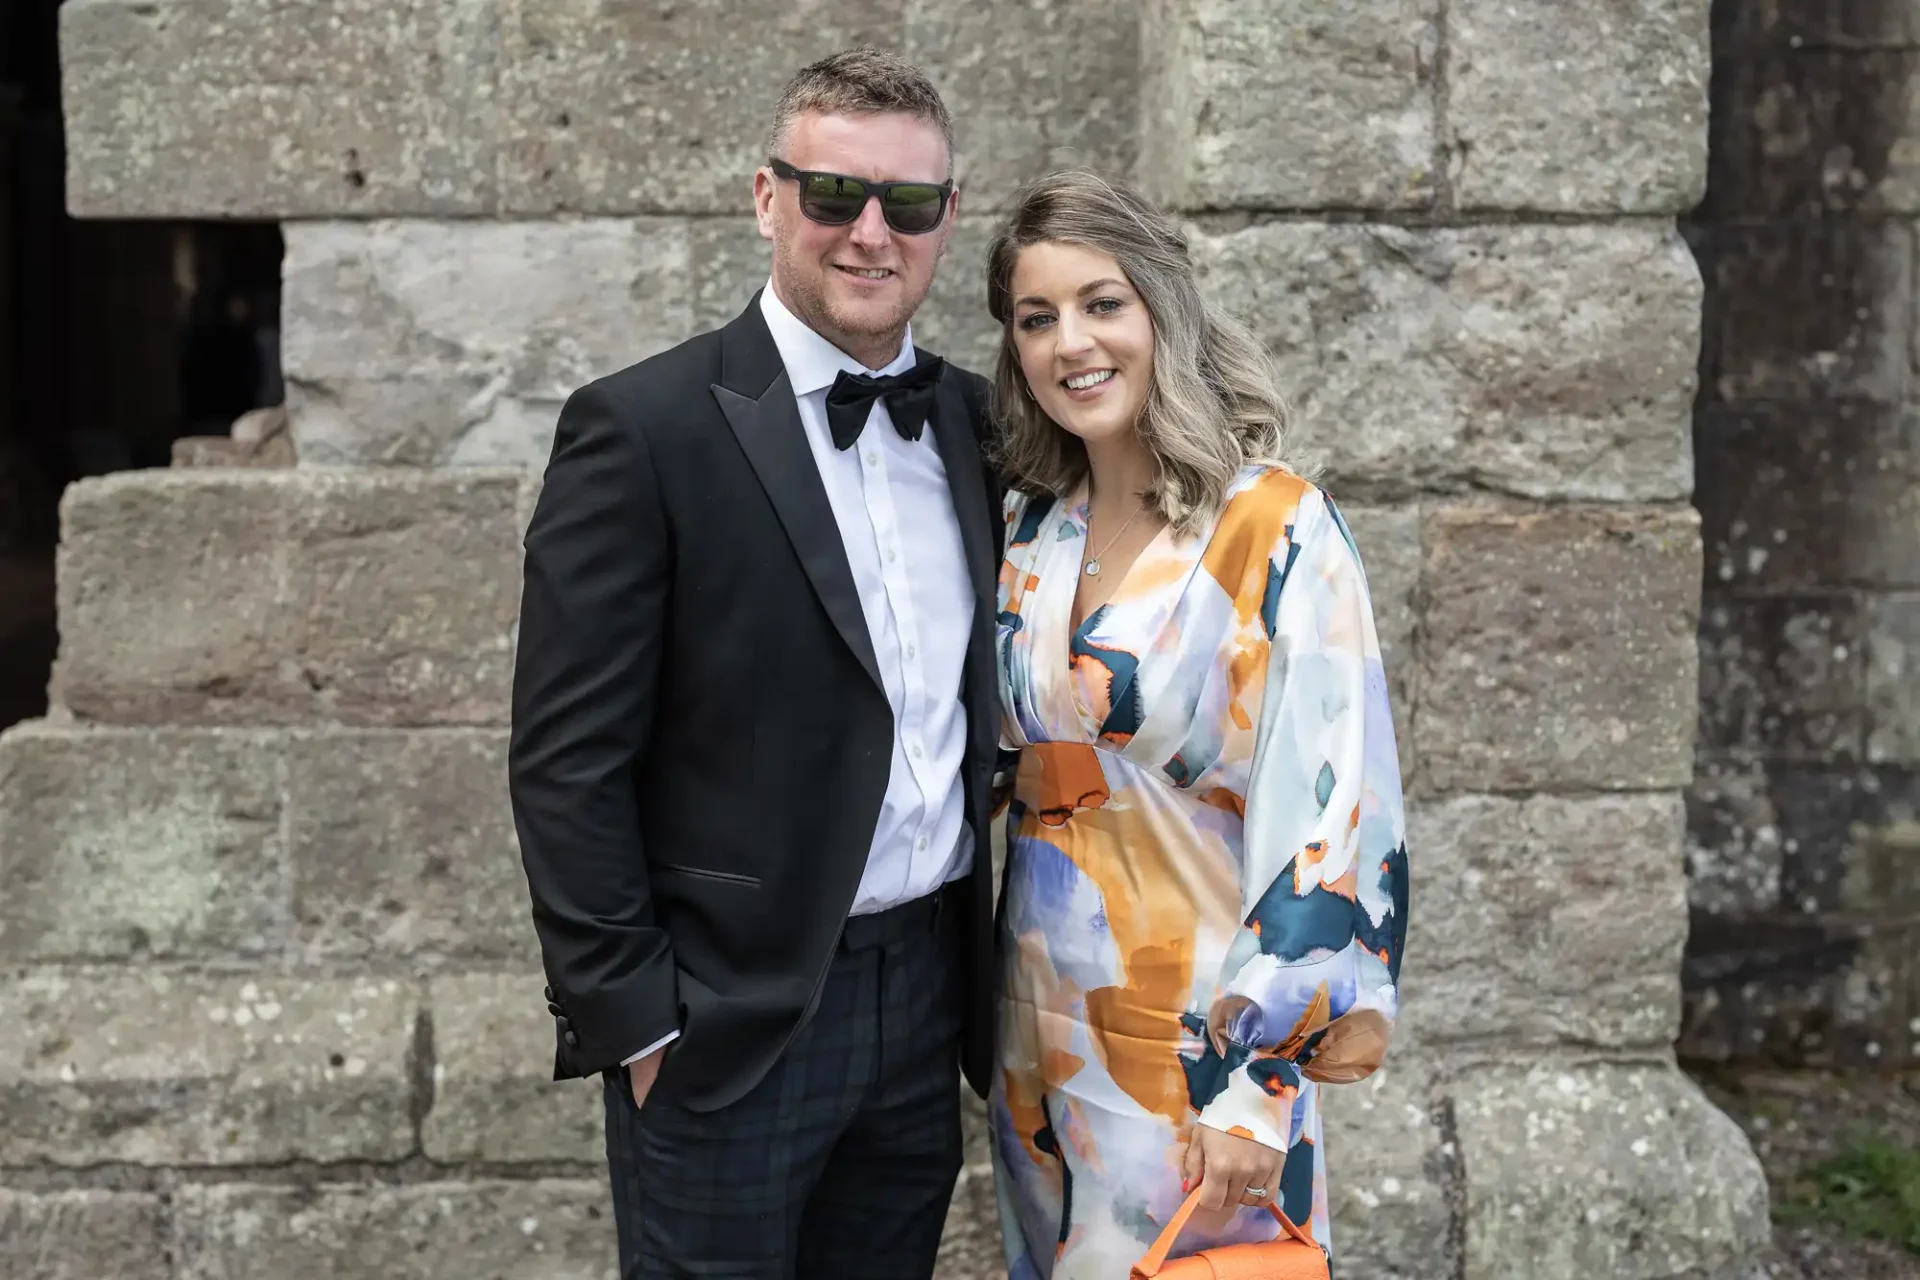 A man in a black tuxedo and sunglasses stands next to a woman in a colorful floral dress, both smiling in front of a stone structure.